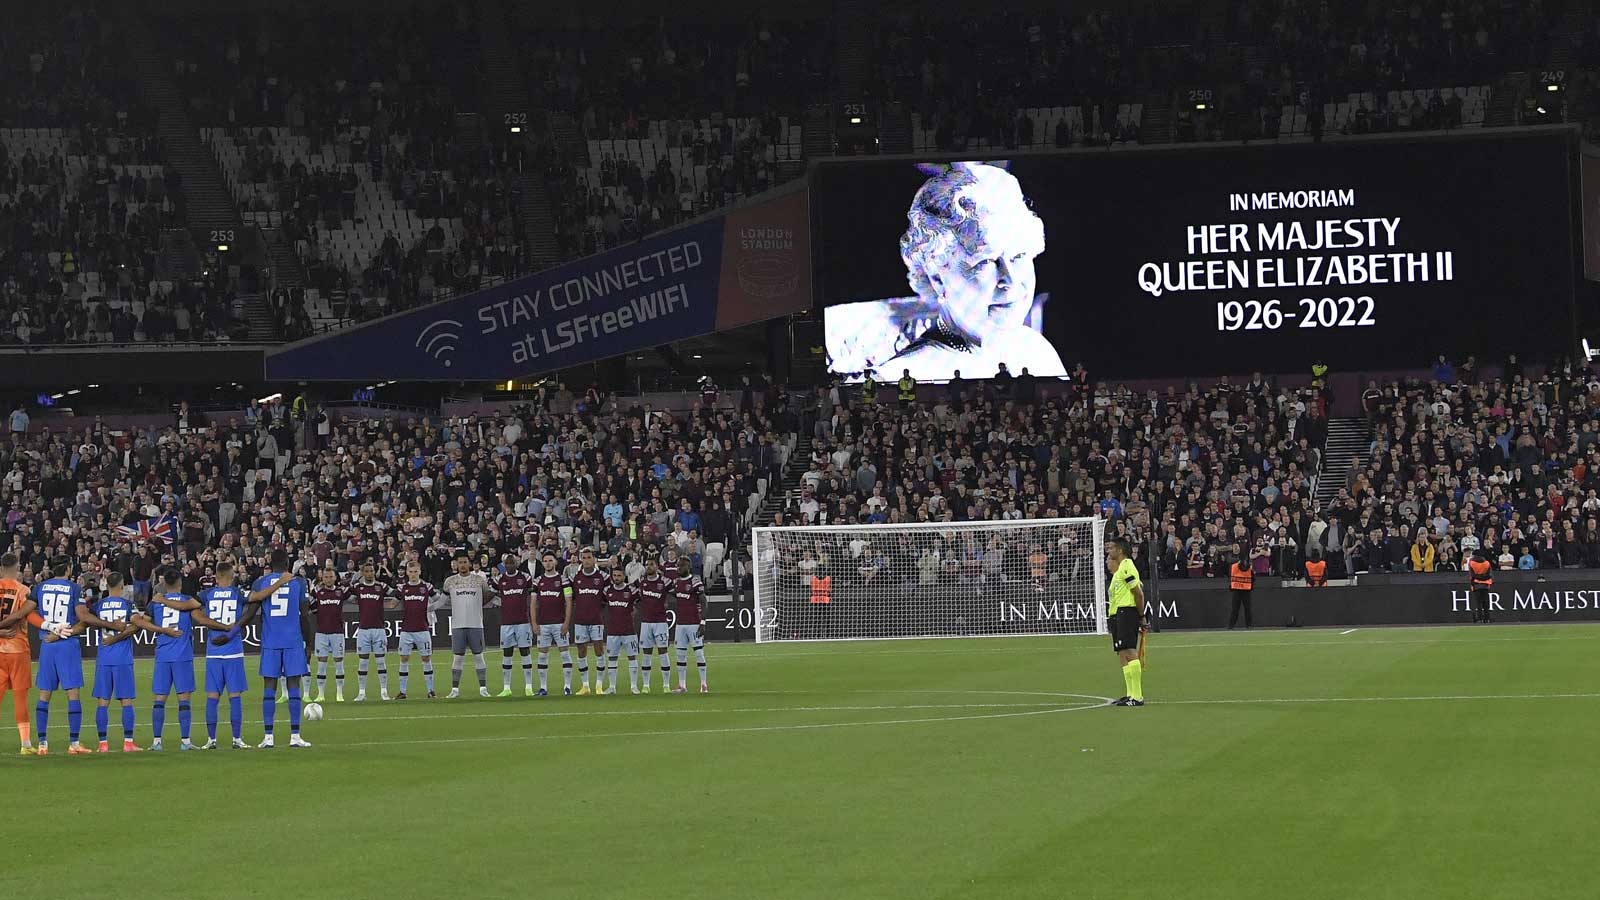 Players observe a minute's silence for the Queen